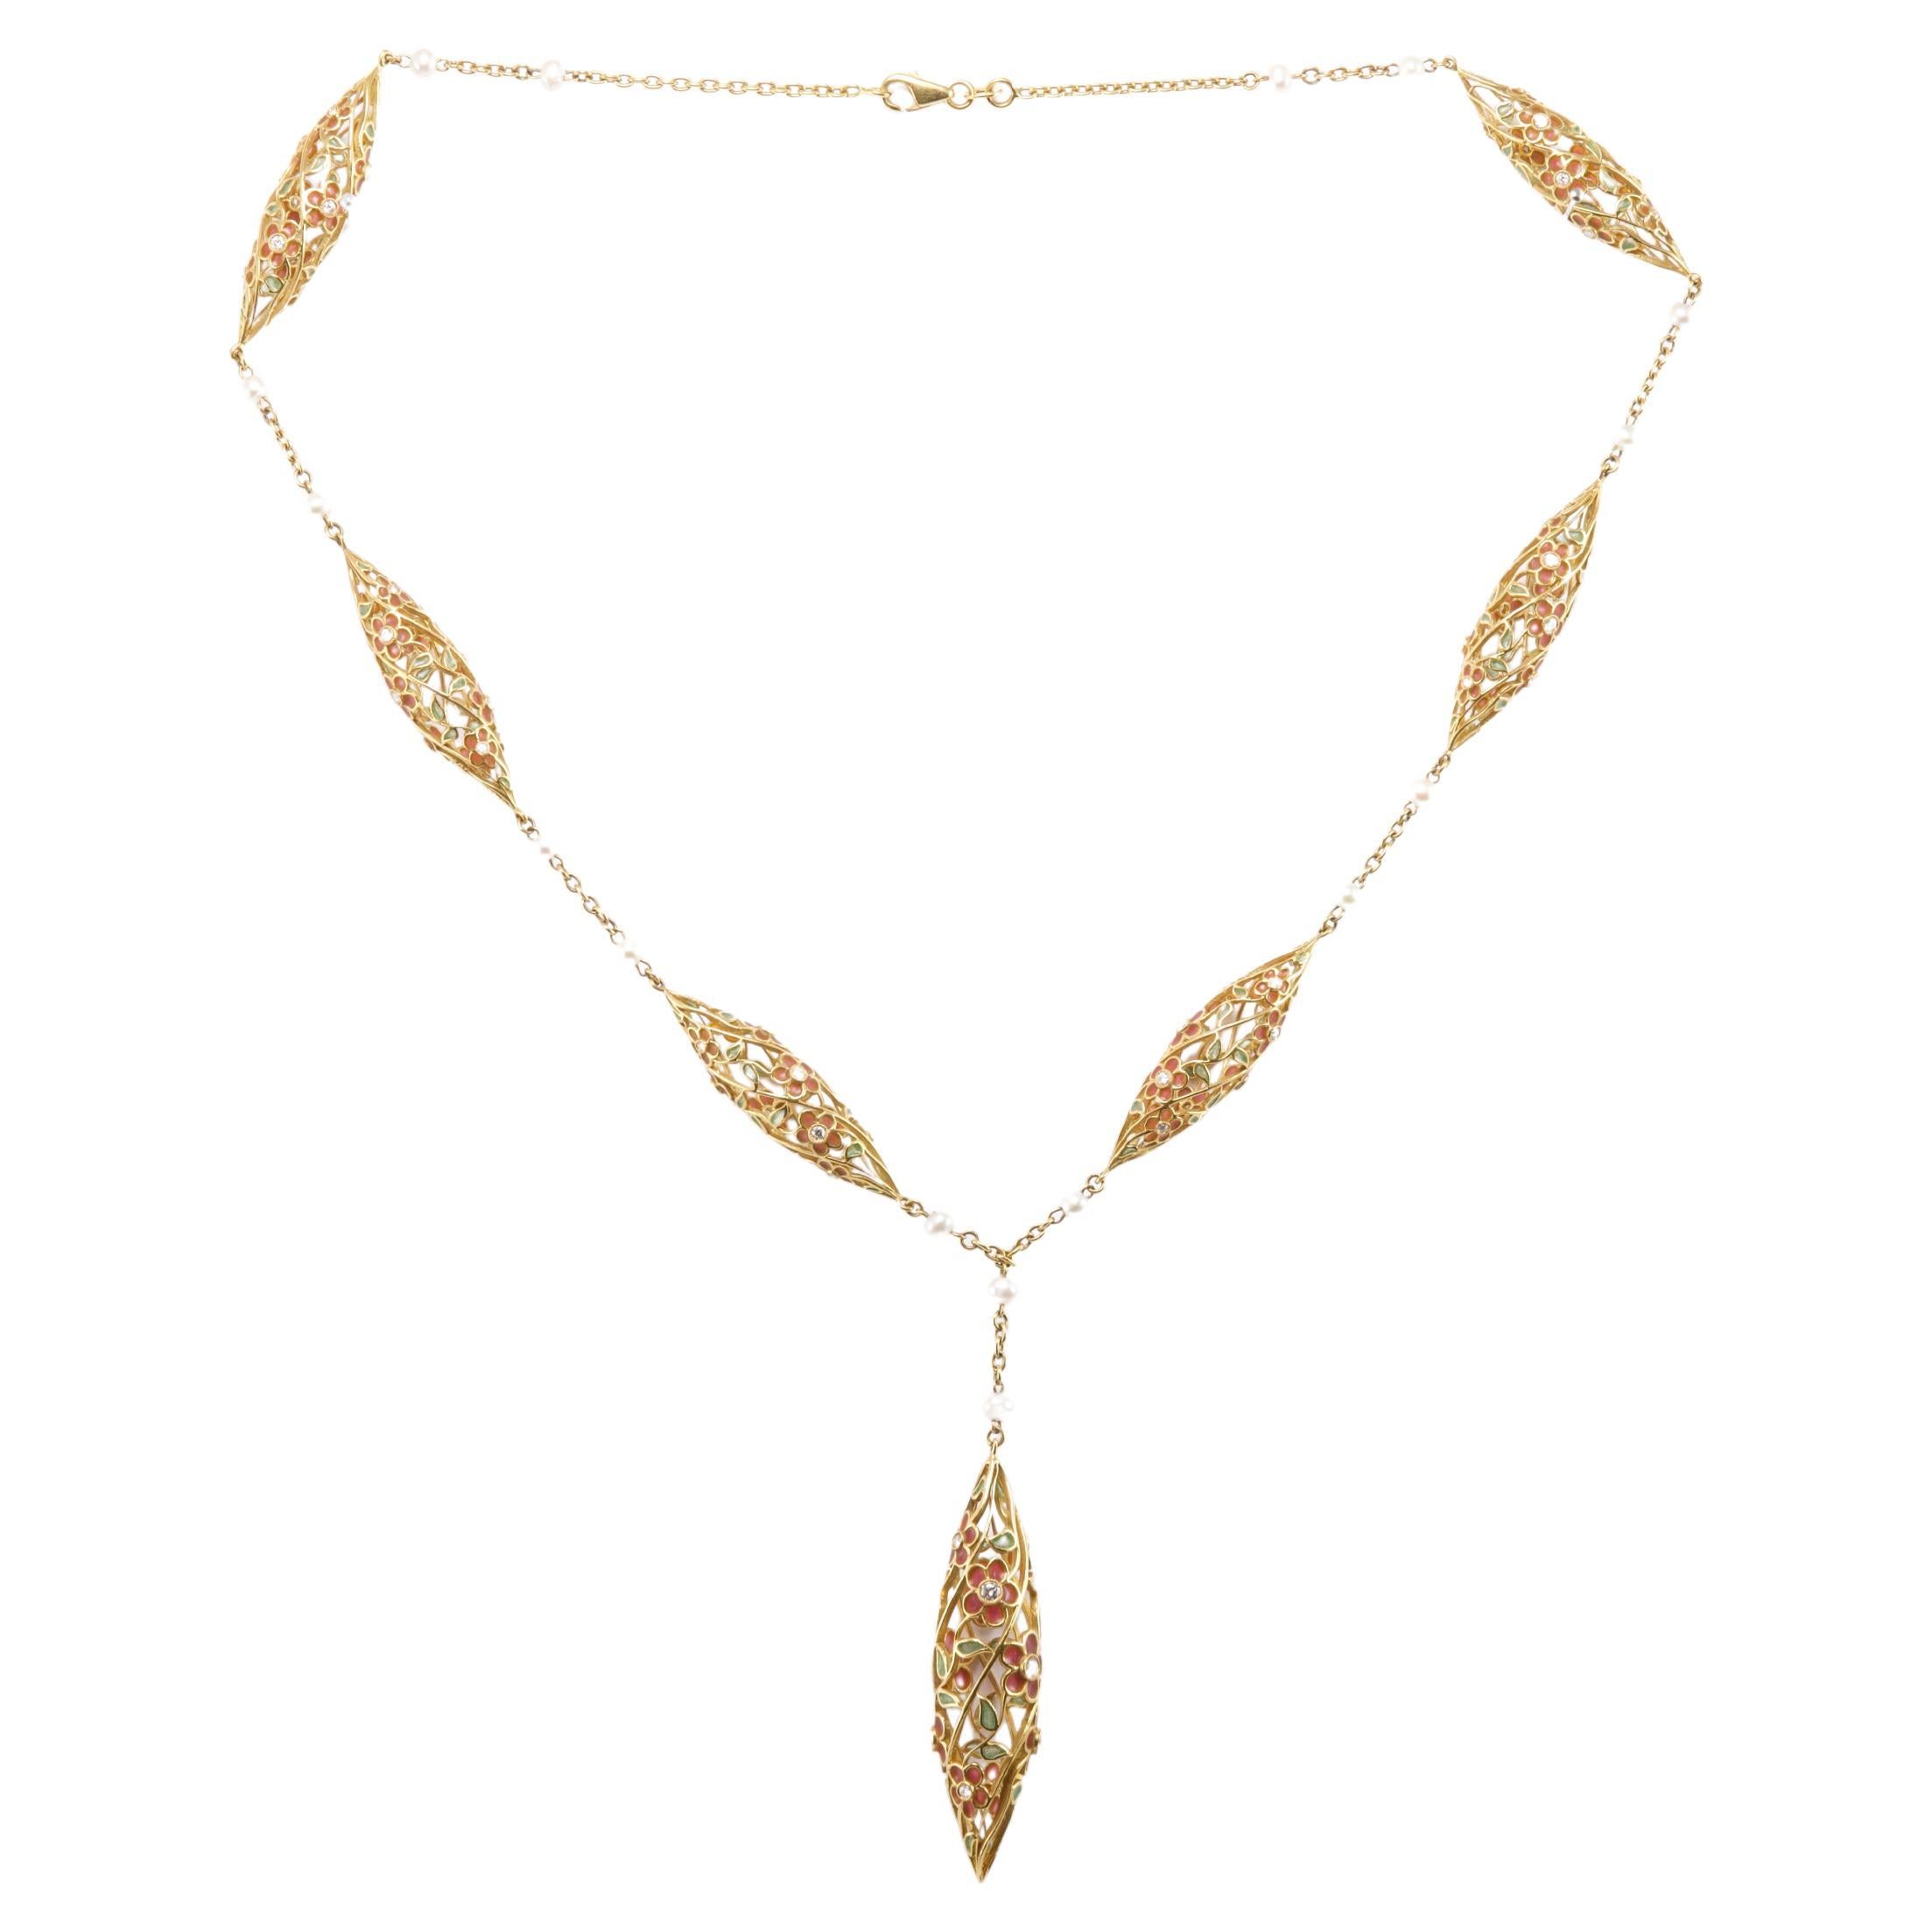 Certified, Enameled, Diamond and Gold, Rain Drop Necklace